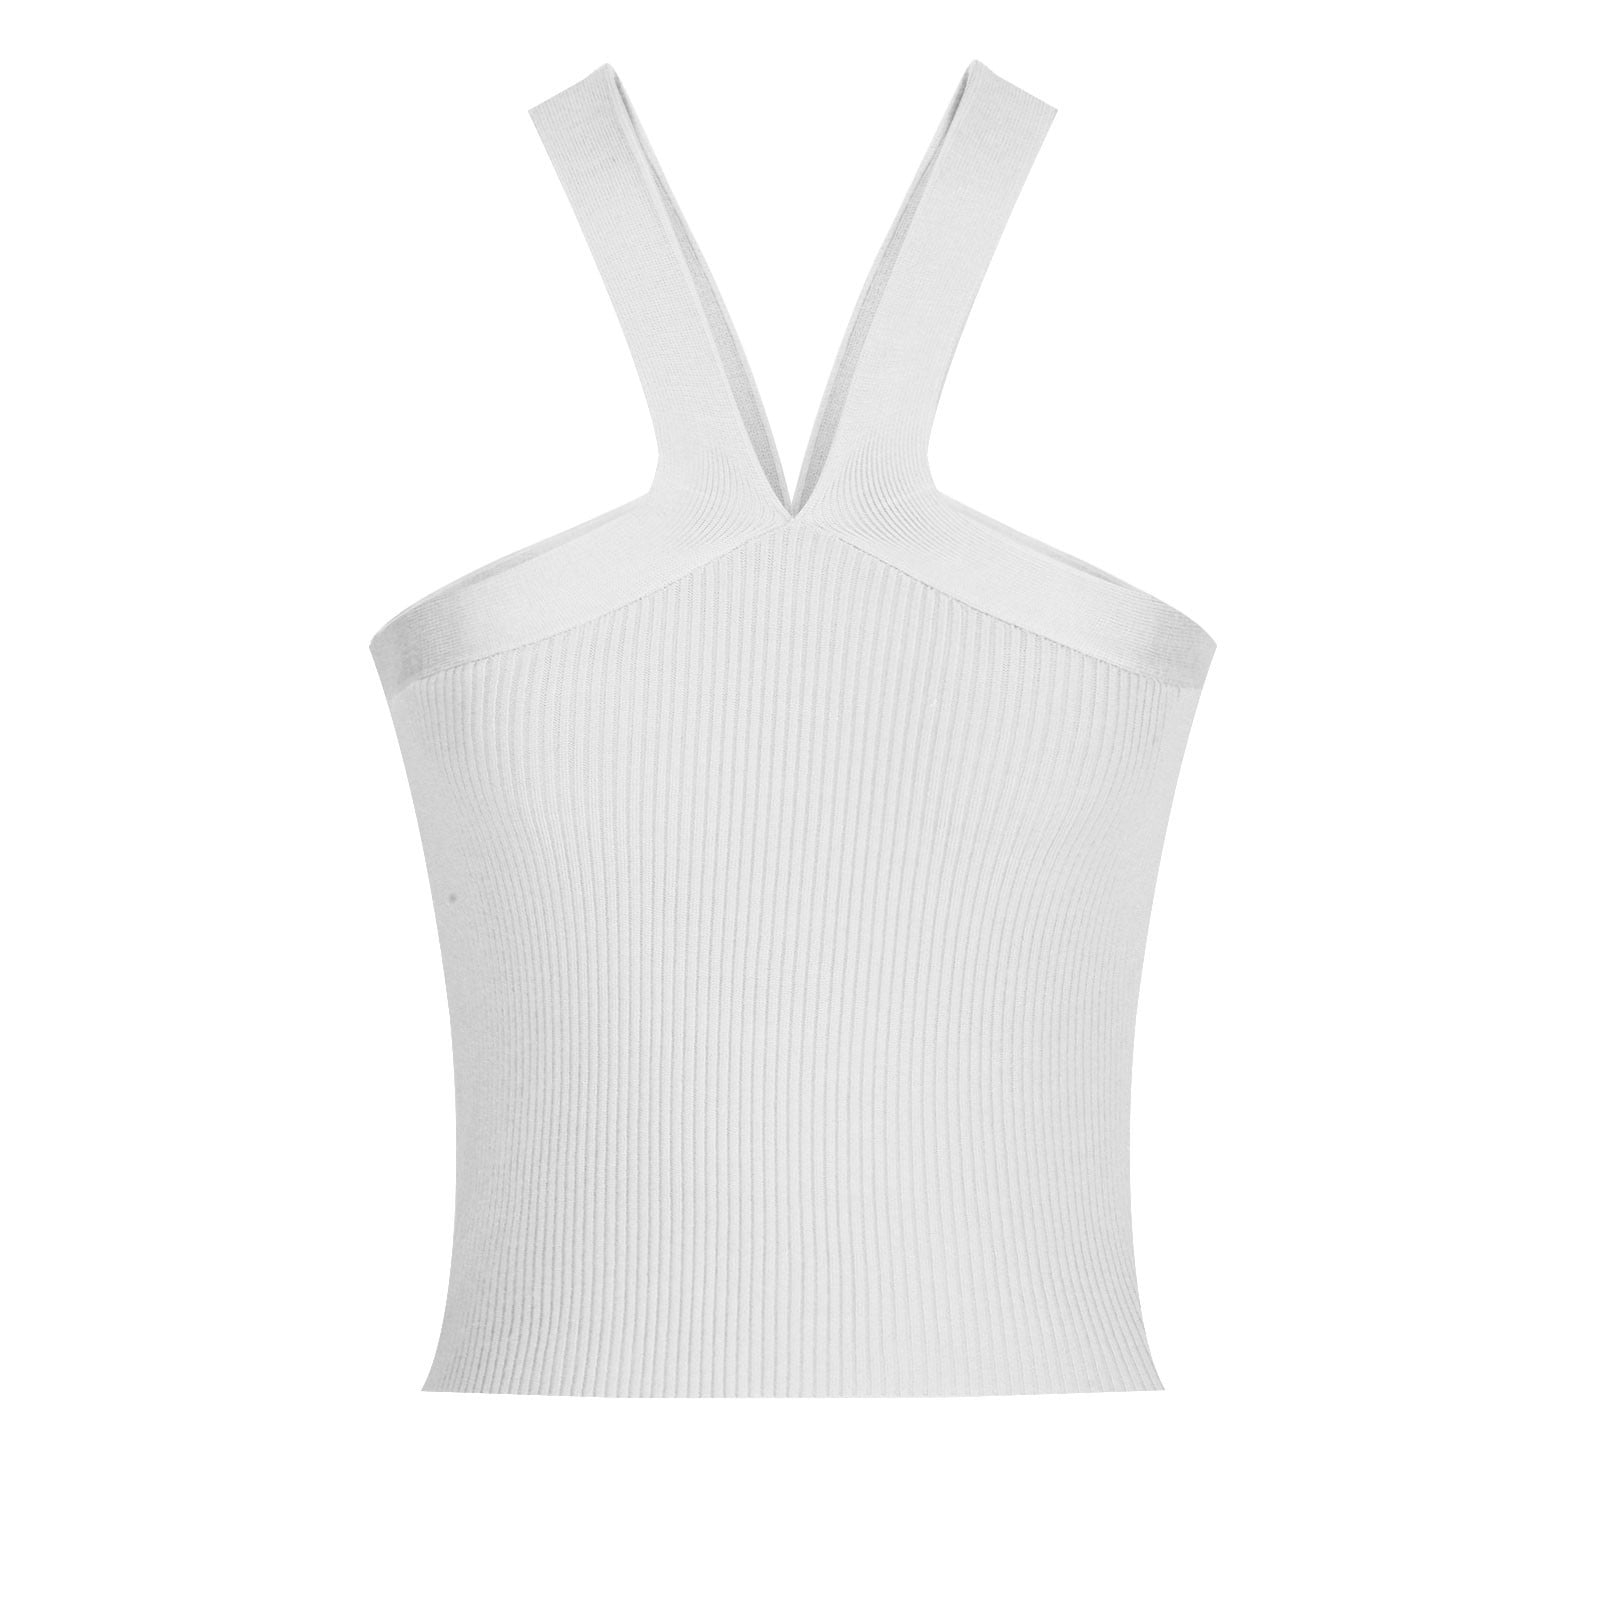 Cathalem Cotton Tank Top Women Workout Cute Racerback Cropped Tank Tops  Summer Clothes,white XL